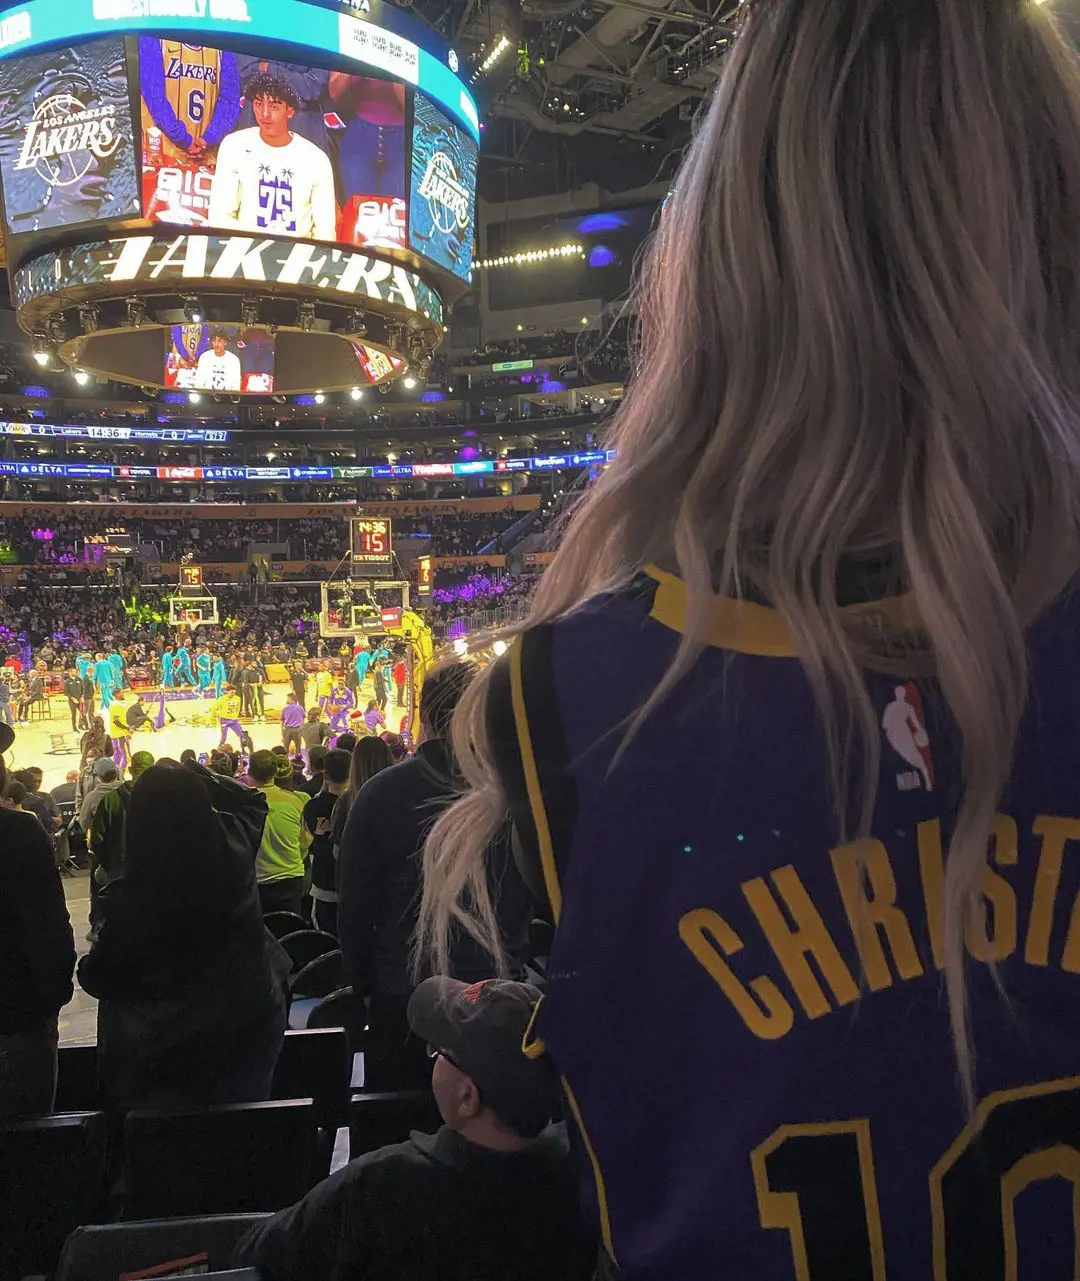 Sydney went to a Lakers game to watch her lover 